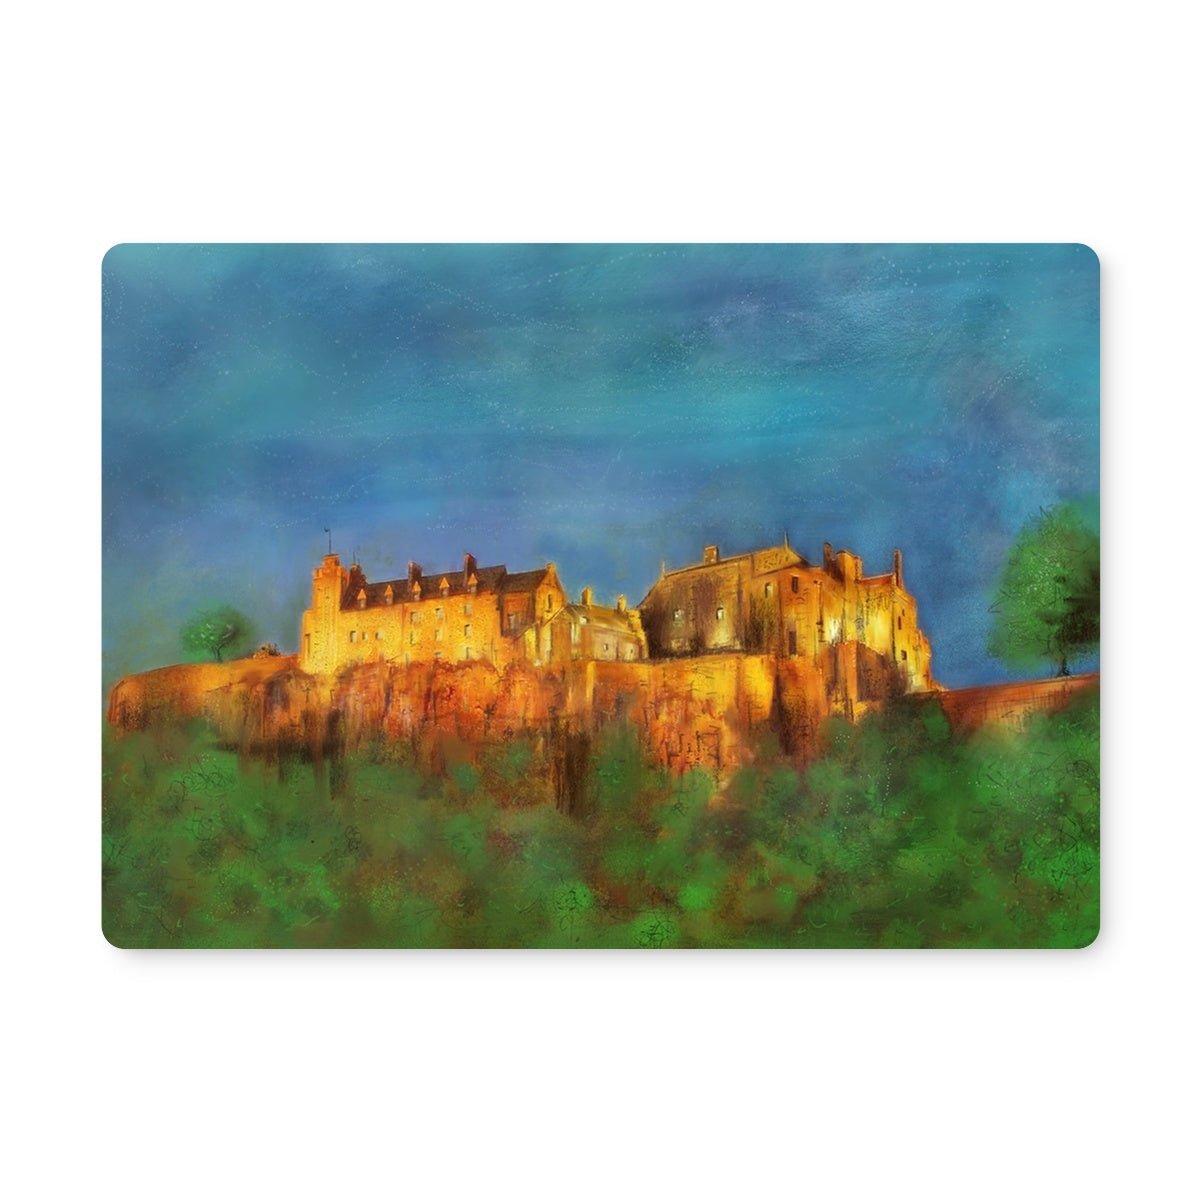 Stirling Castle Art Gifts Placemat-Placemats-Historic & Iconic Scotland Art Gallery-2 Placemats-Paintings, Prints, Homeware, Art Gifts From Scotland By Scottish Artist Kevin Hunter